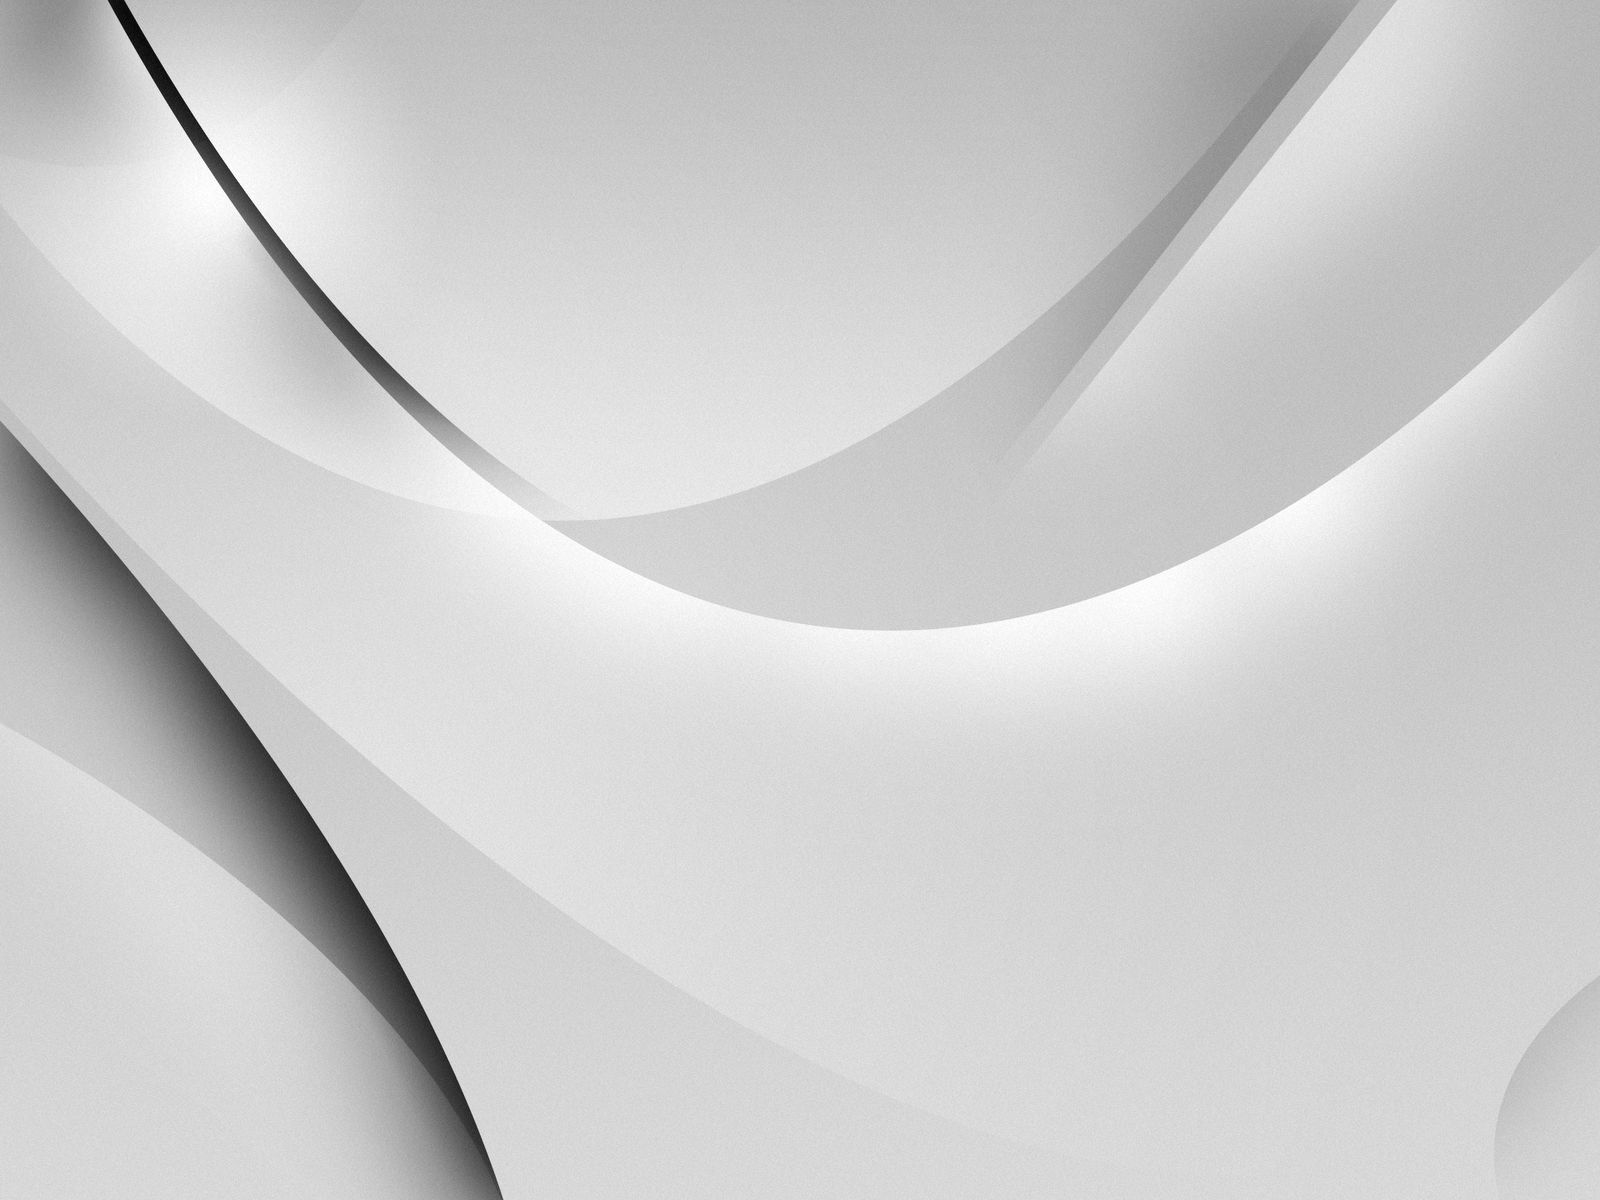 white abstract wallpaper. Black and White Wallpaper. Abstract